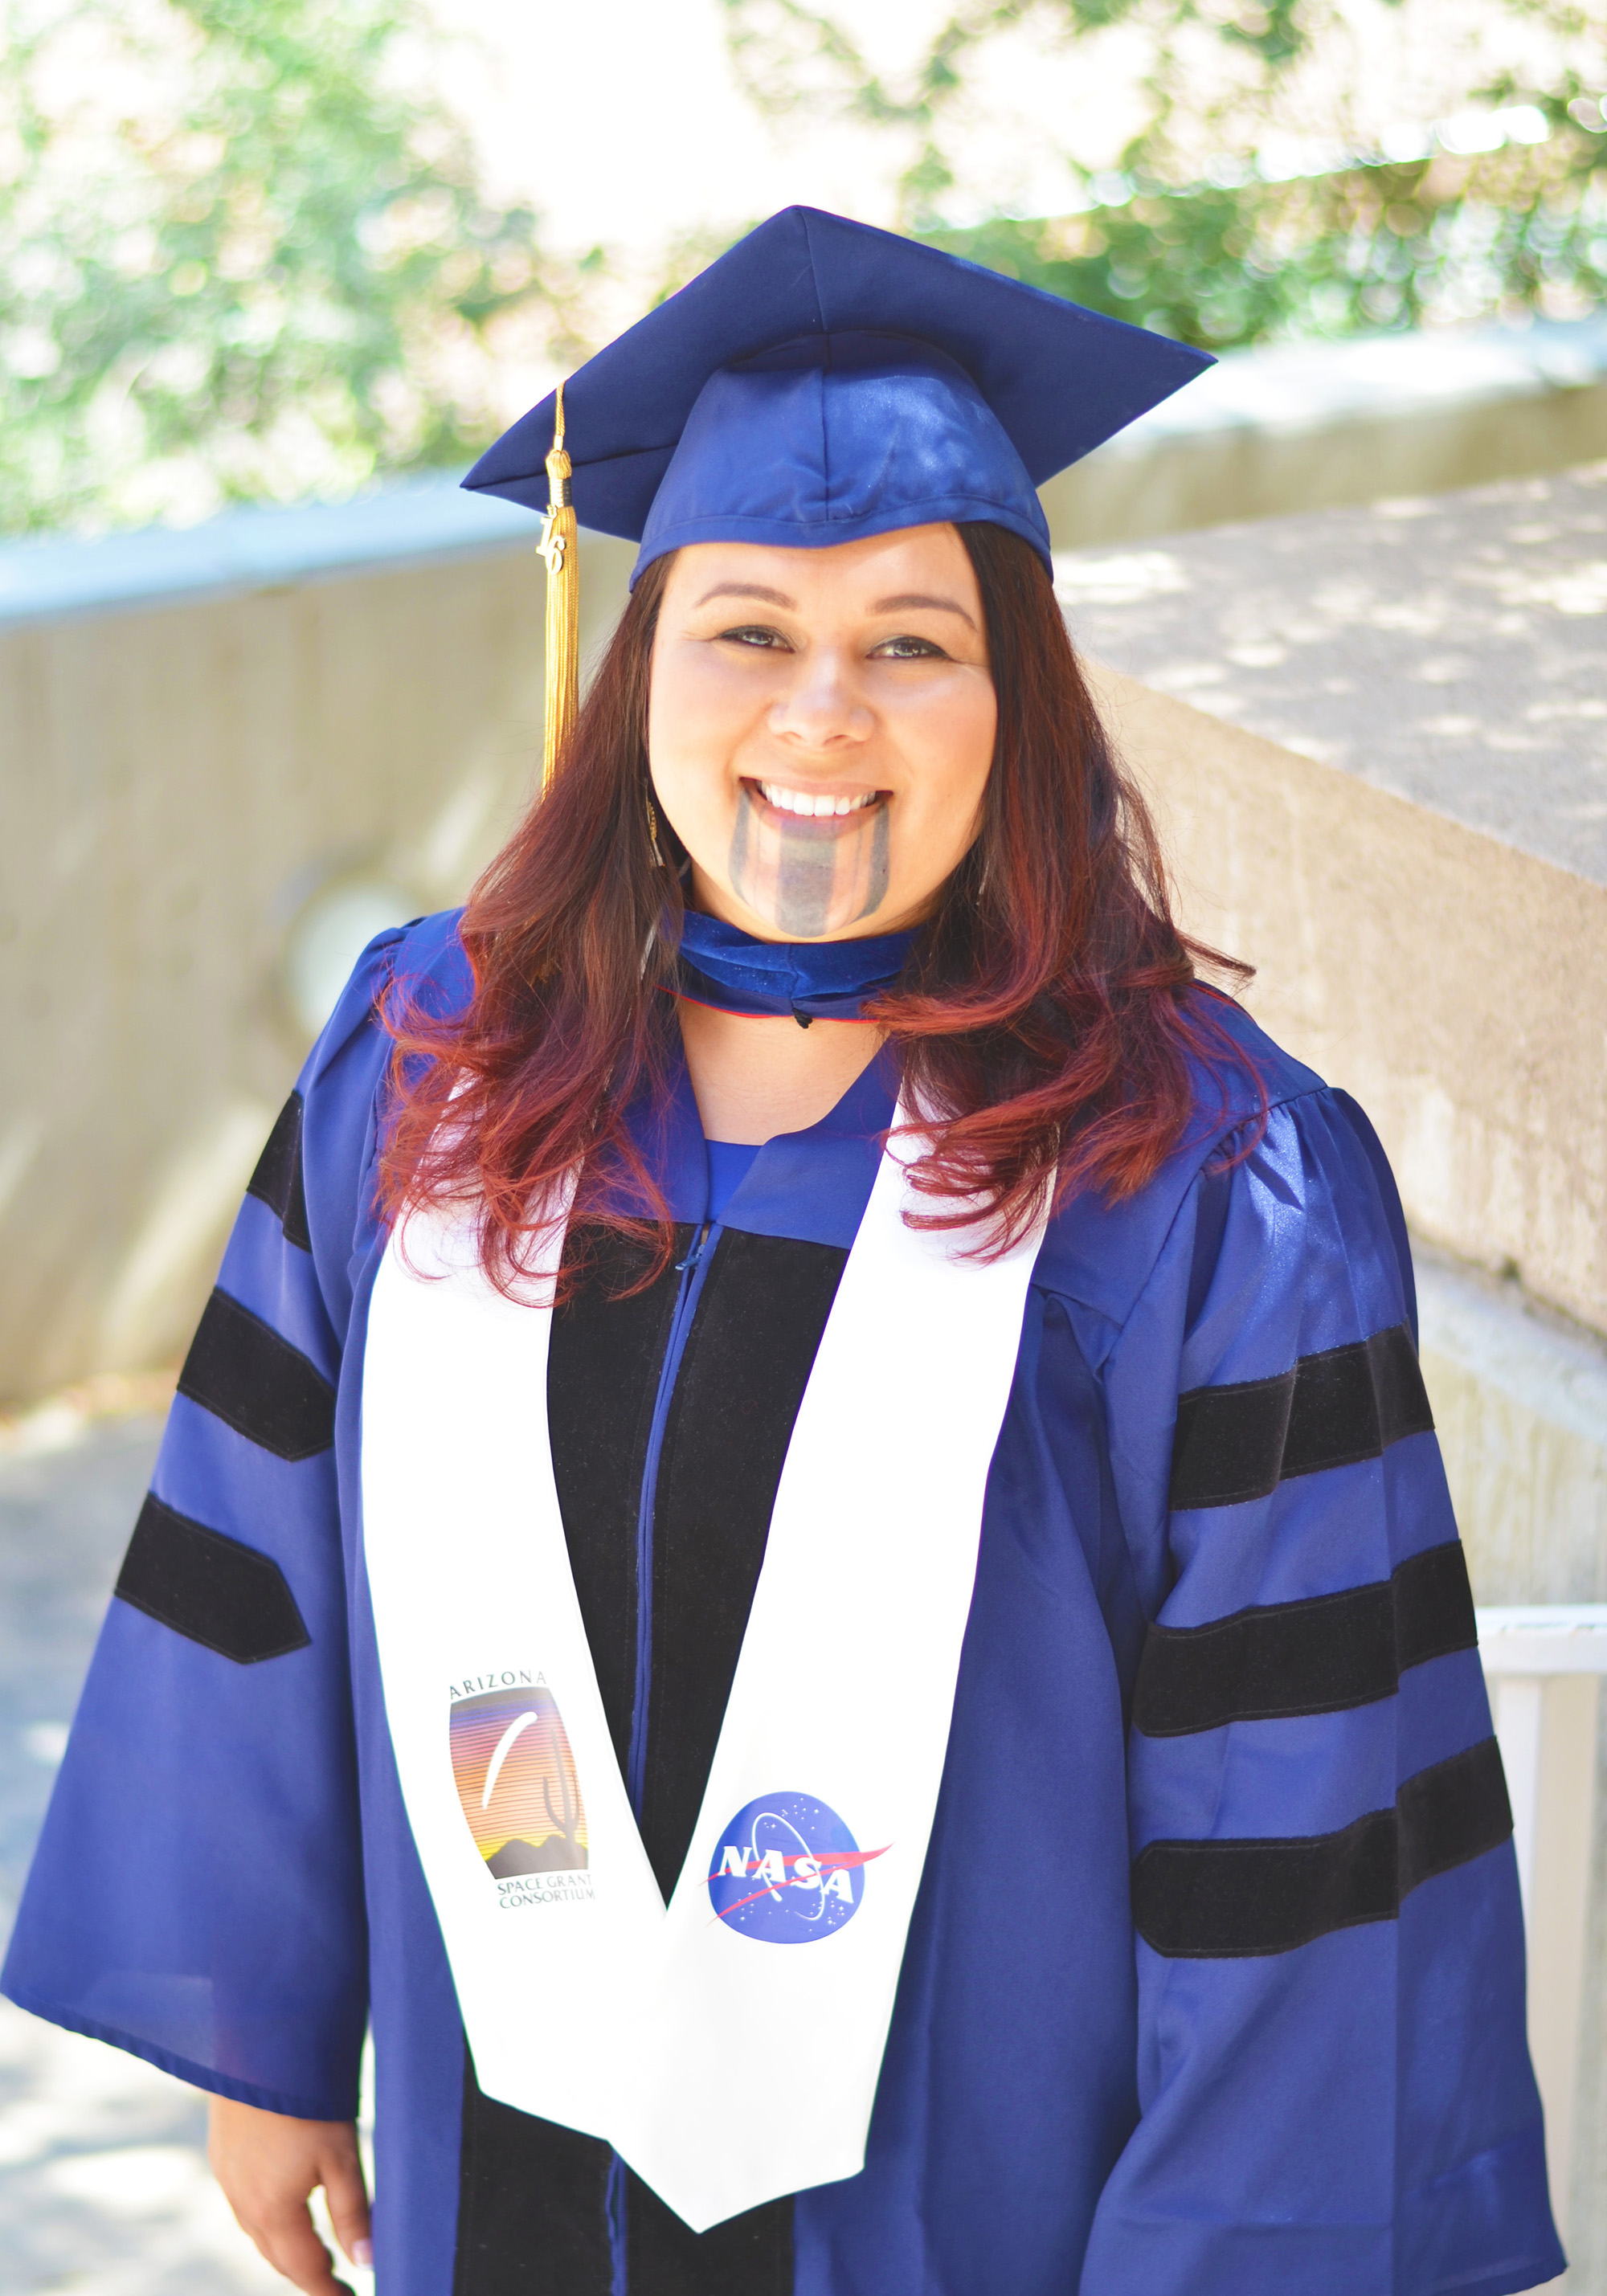 Congratulations to Seafha Ramos, 2011 UA Space Grant Fellow, for her "Outstanding Dissertation"!